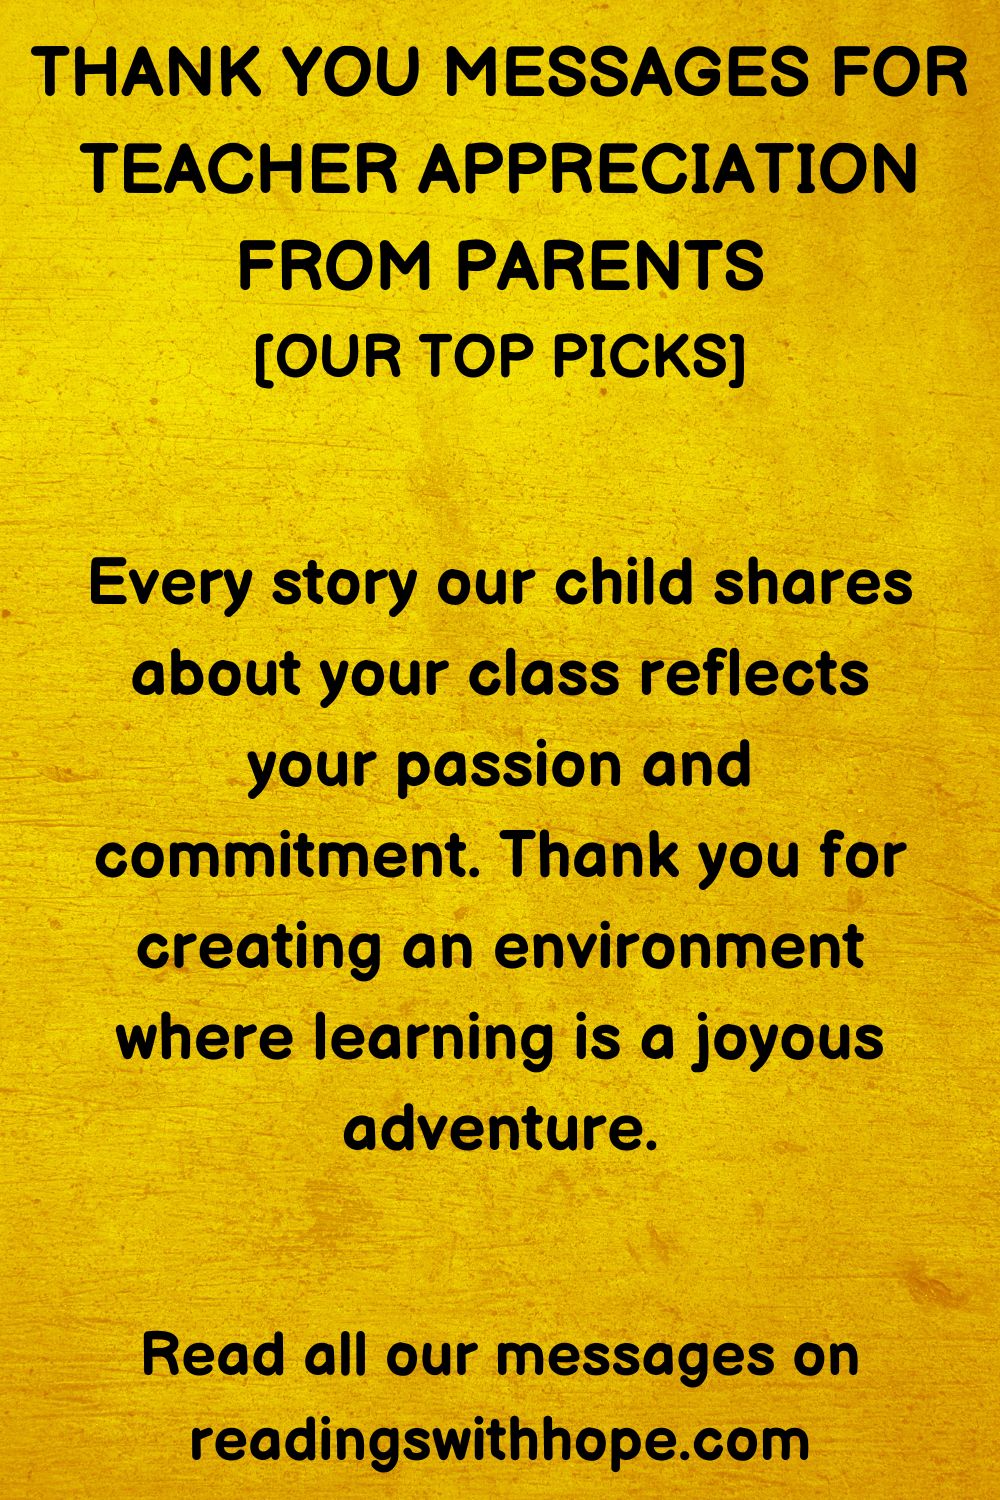 Thank You Message For Teacher Appreciation From Parents
